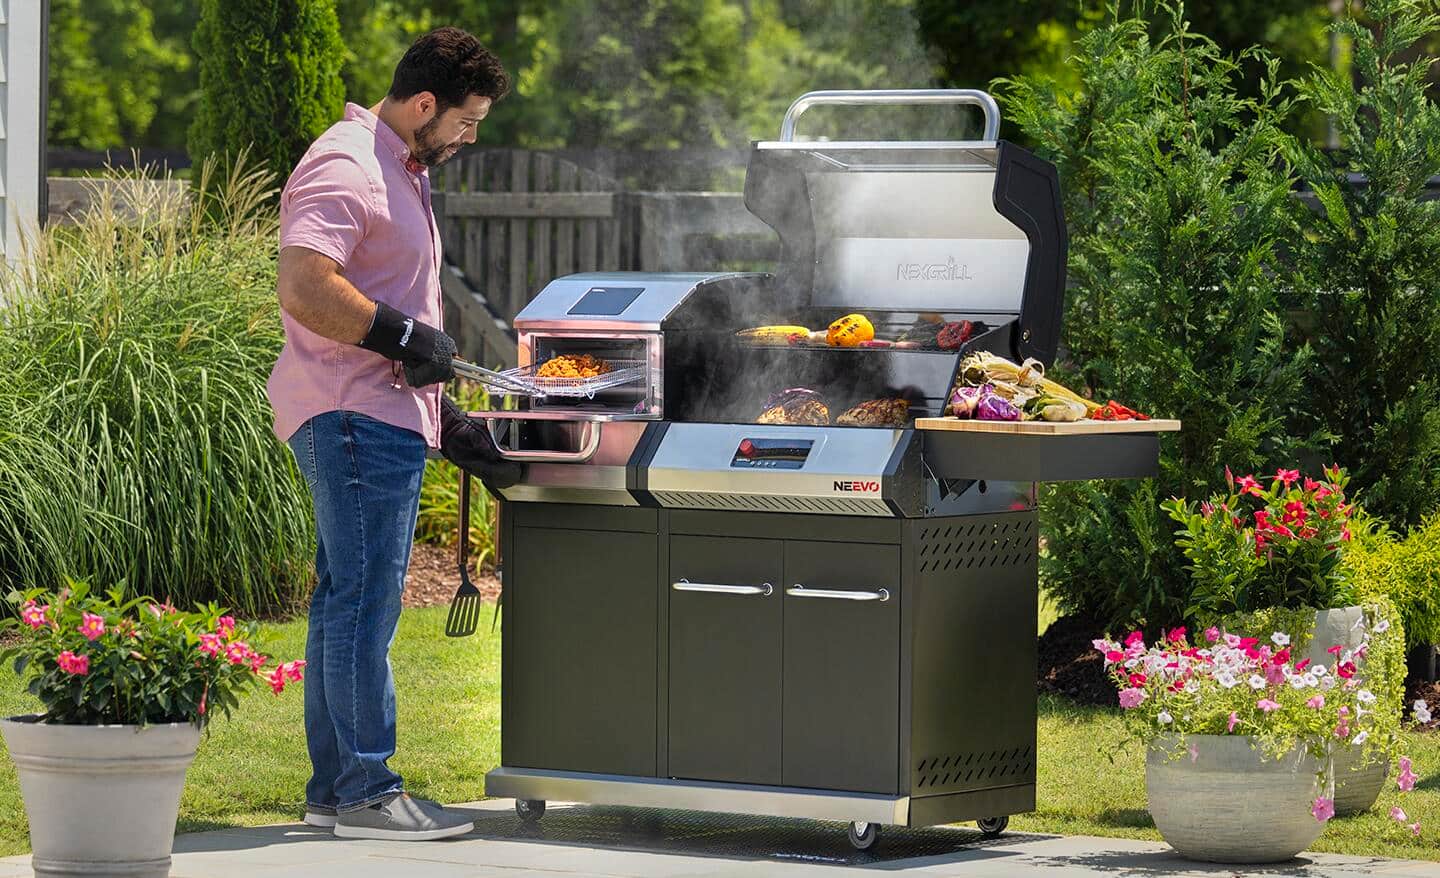 A man wearing a heat-resistant glove uses tongs to adjust food cooking on a grill.